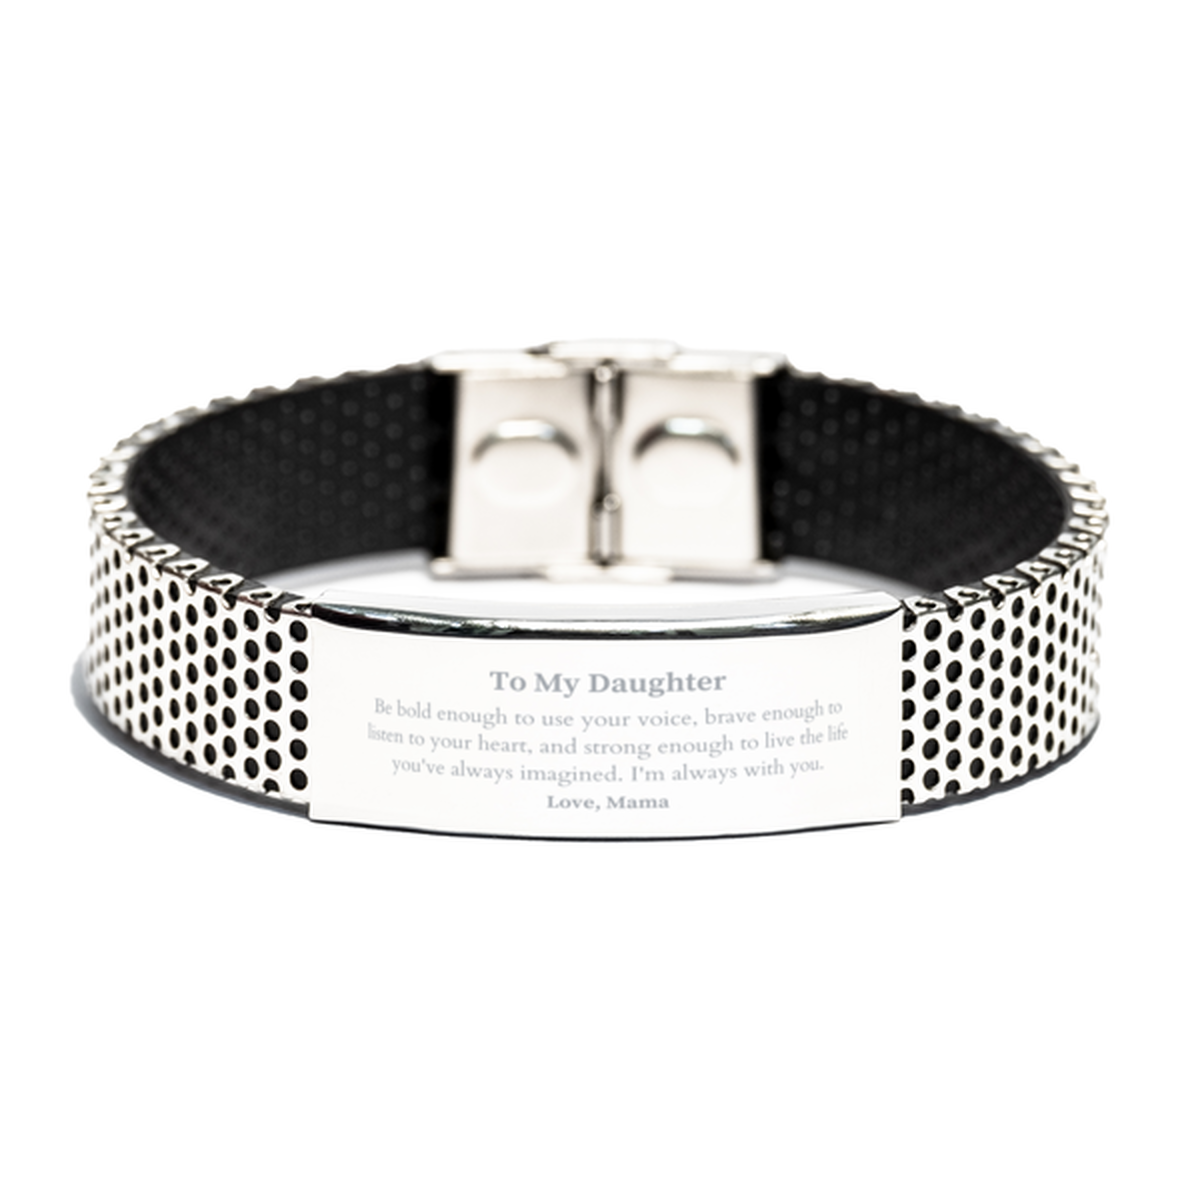 Keepsake Daughter Stainless Steel Bracelet Gift Idea Graduation Christmas Birthday Daughter from Mama, Daughter Be bold enough to use your voice, brave enough to listen to your heart. Love, Mama